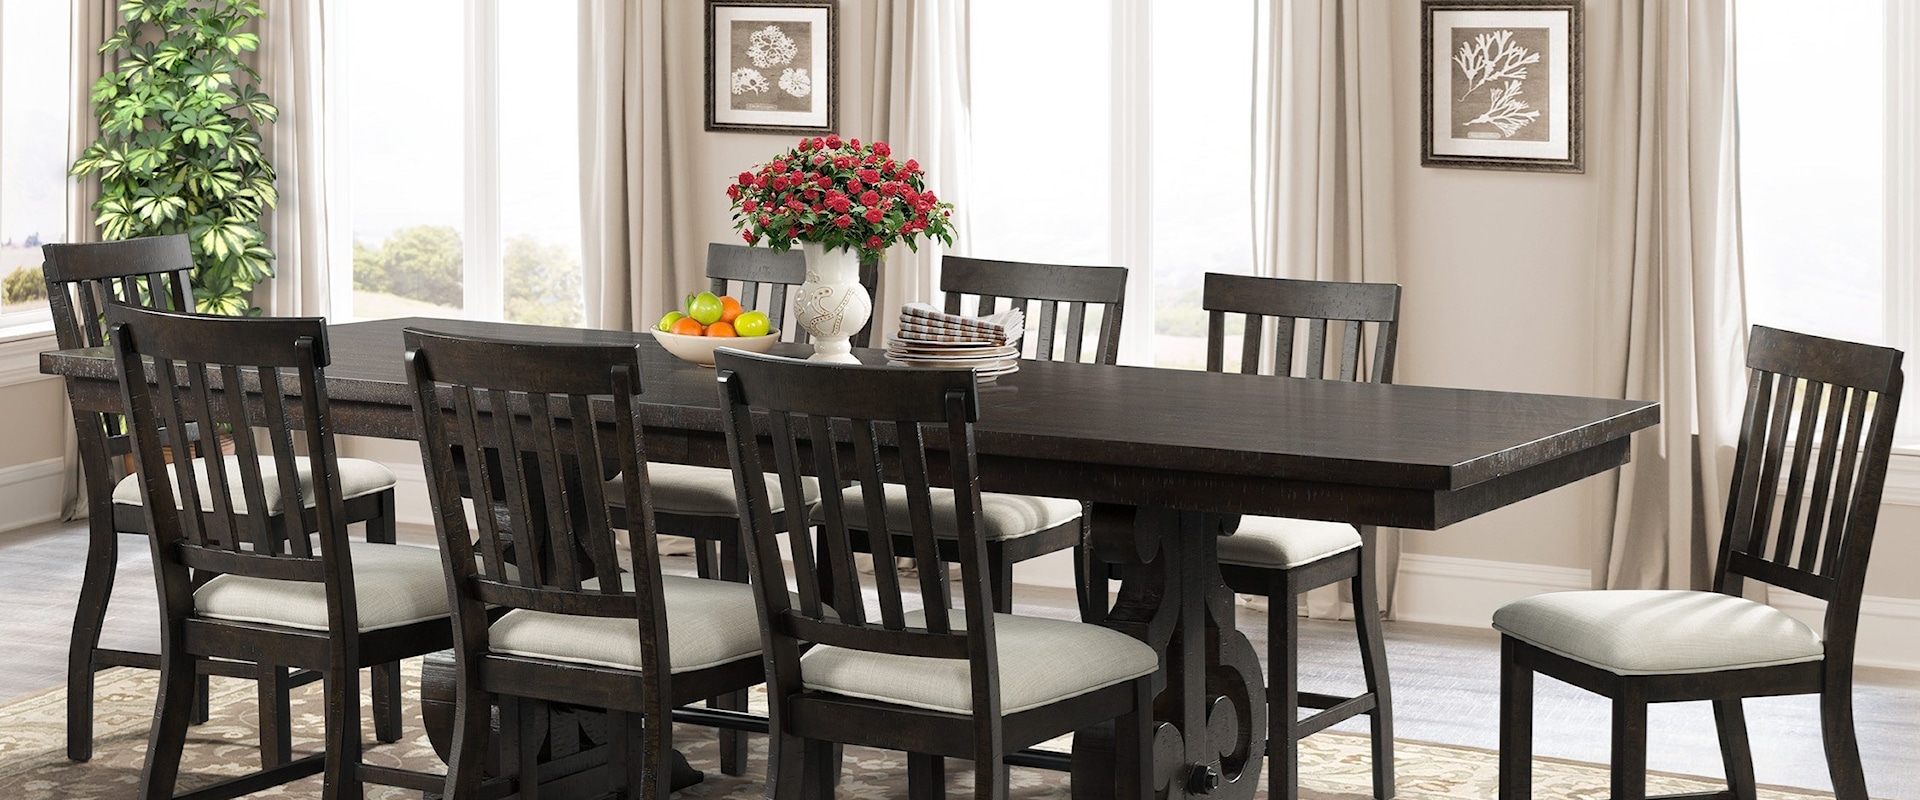 9-Piece Counter Height Dining Set